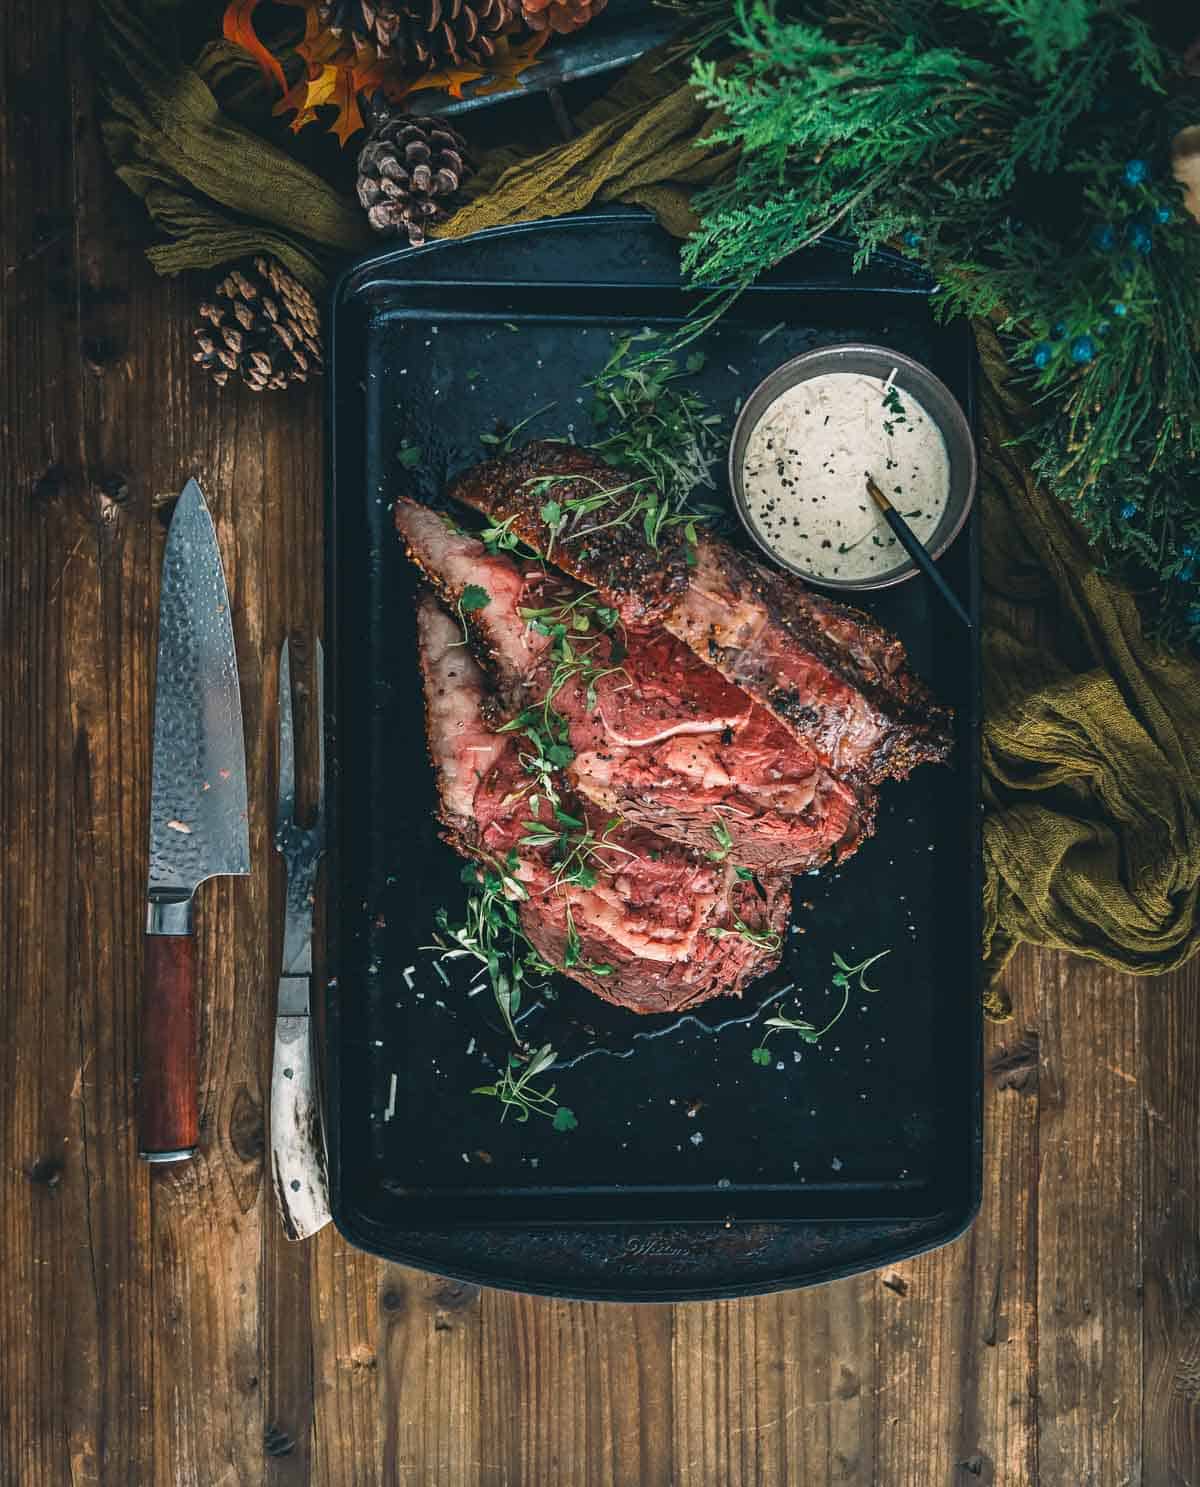 Steak on a baking sheet with herbs and spices.